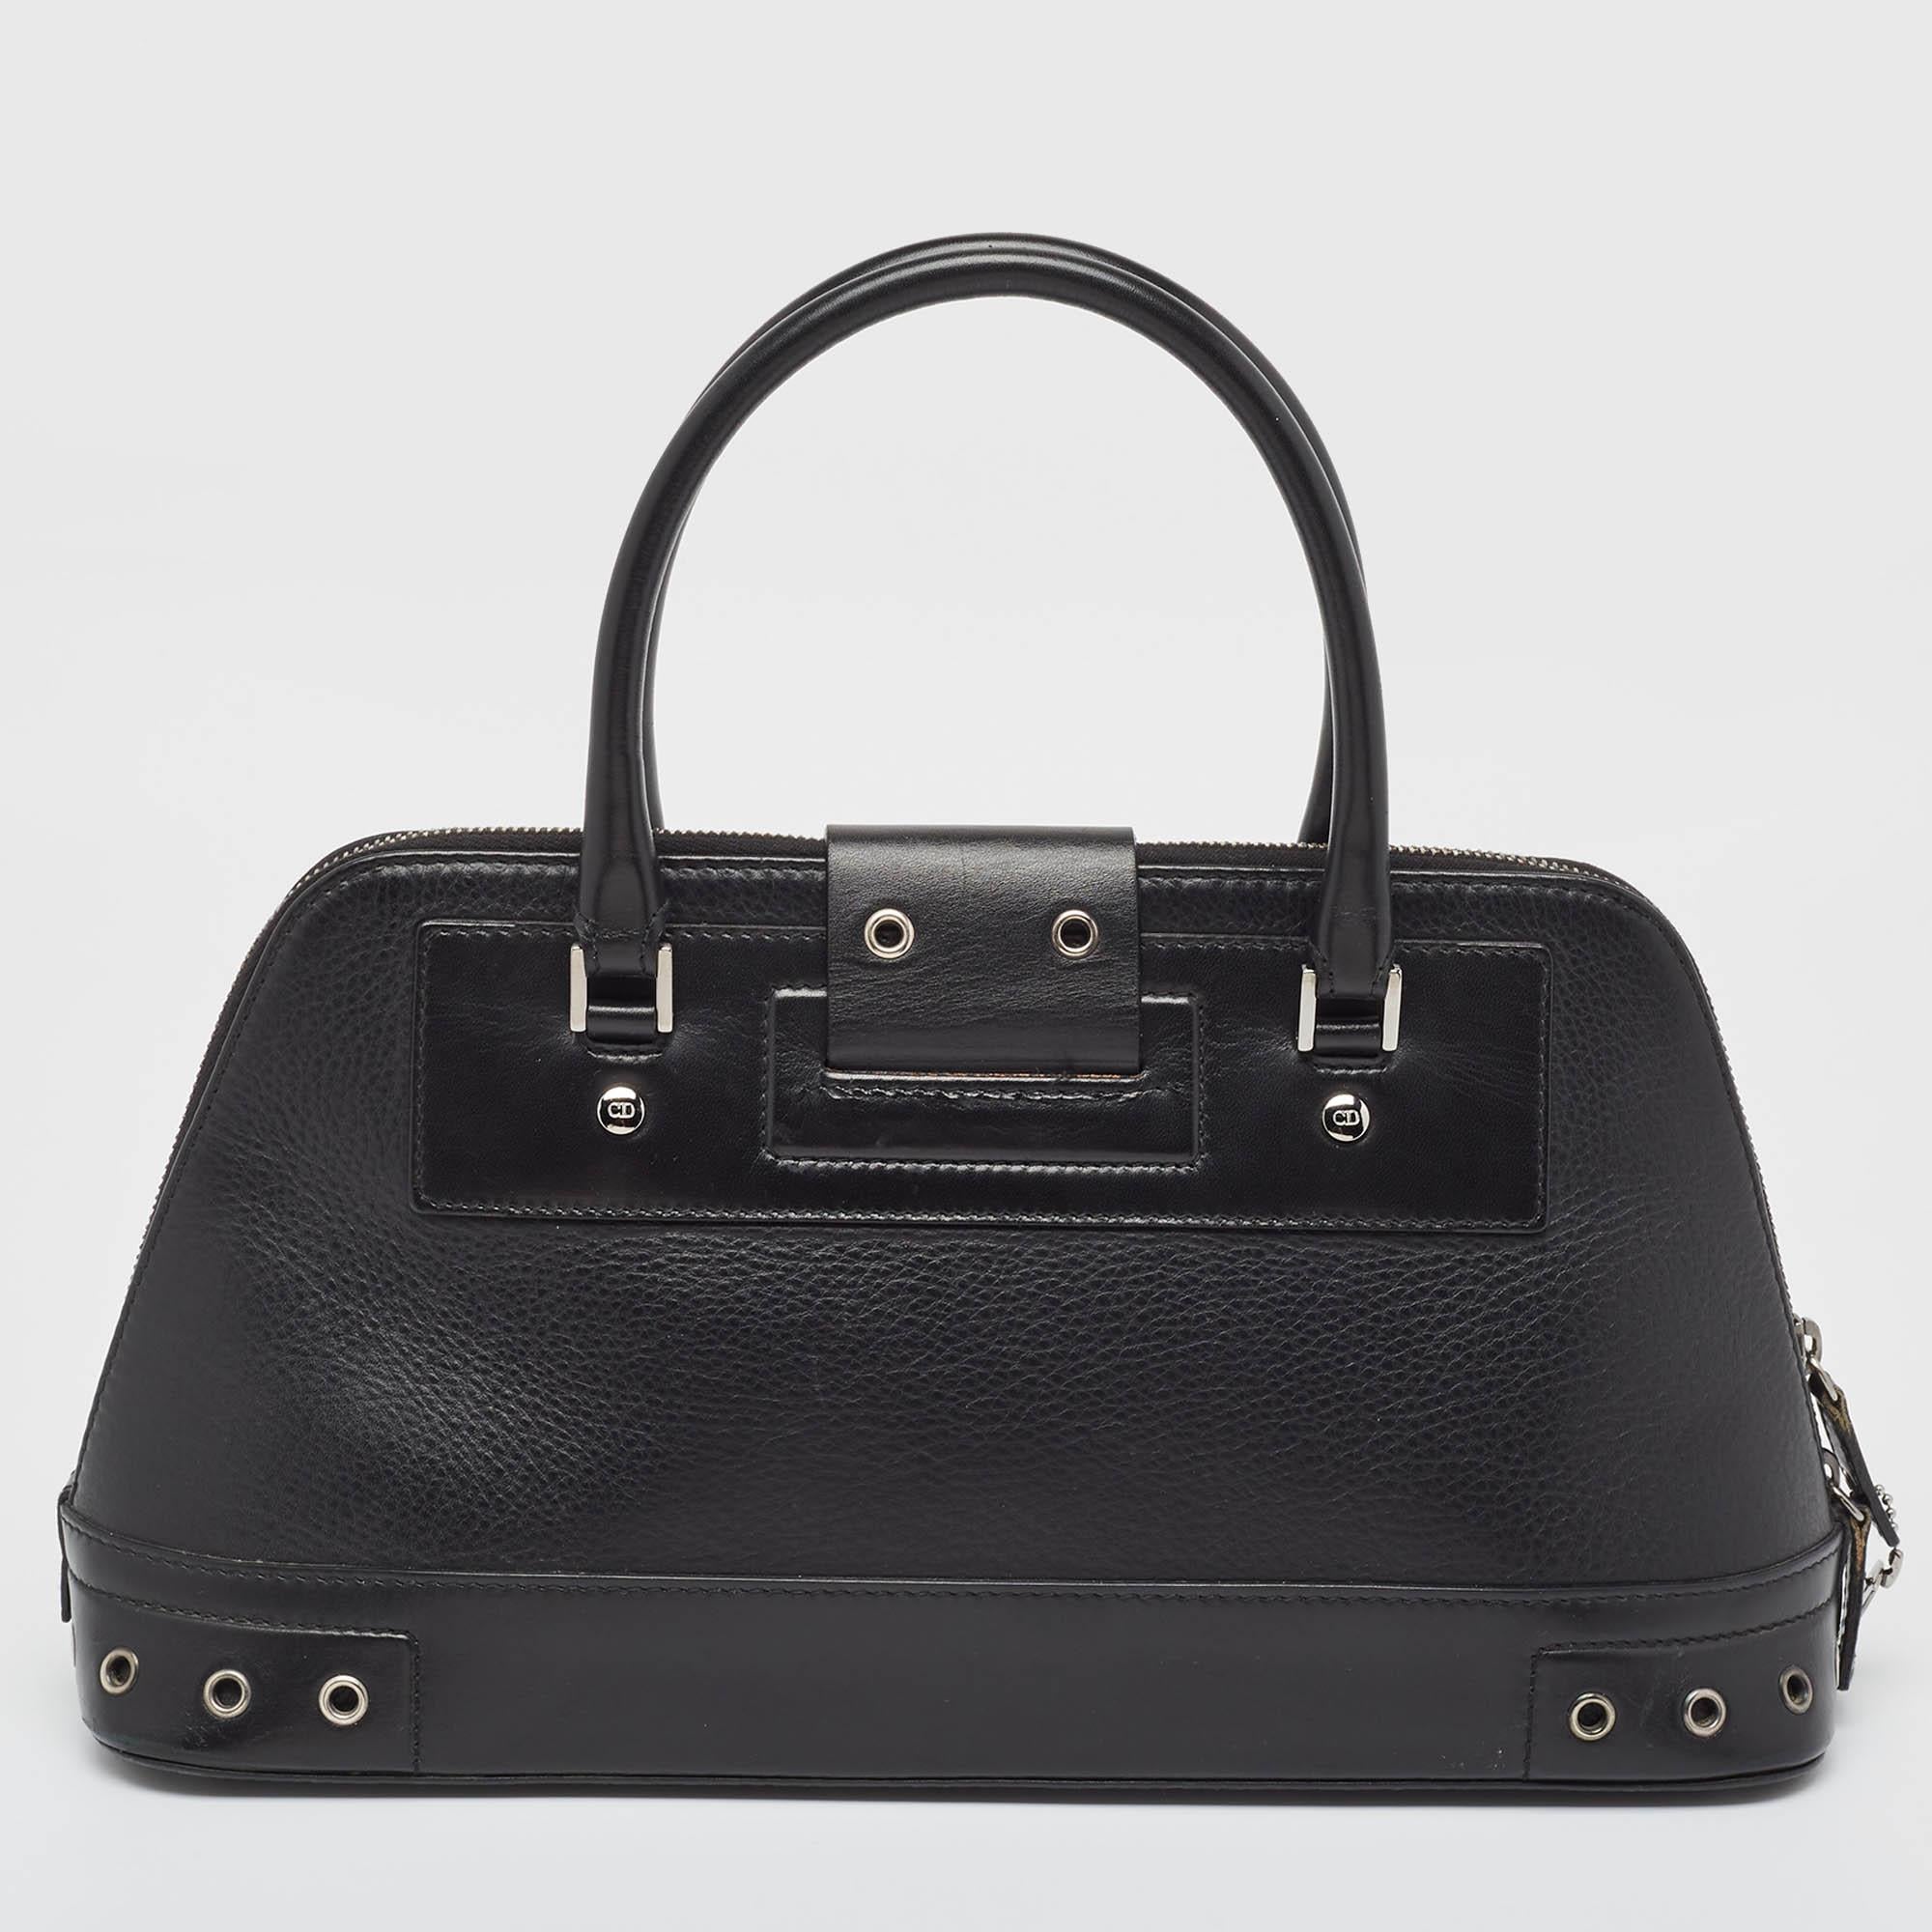 This satchel is rendered in the finest quality materials into an elegant design. Versatile and functional, it is well-sized for your daily use.

